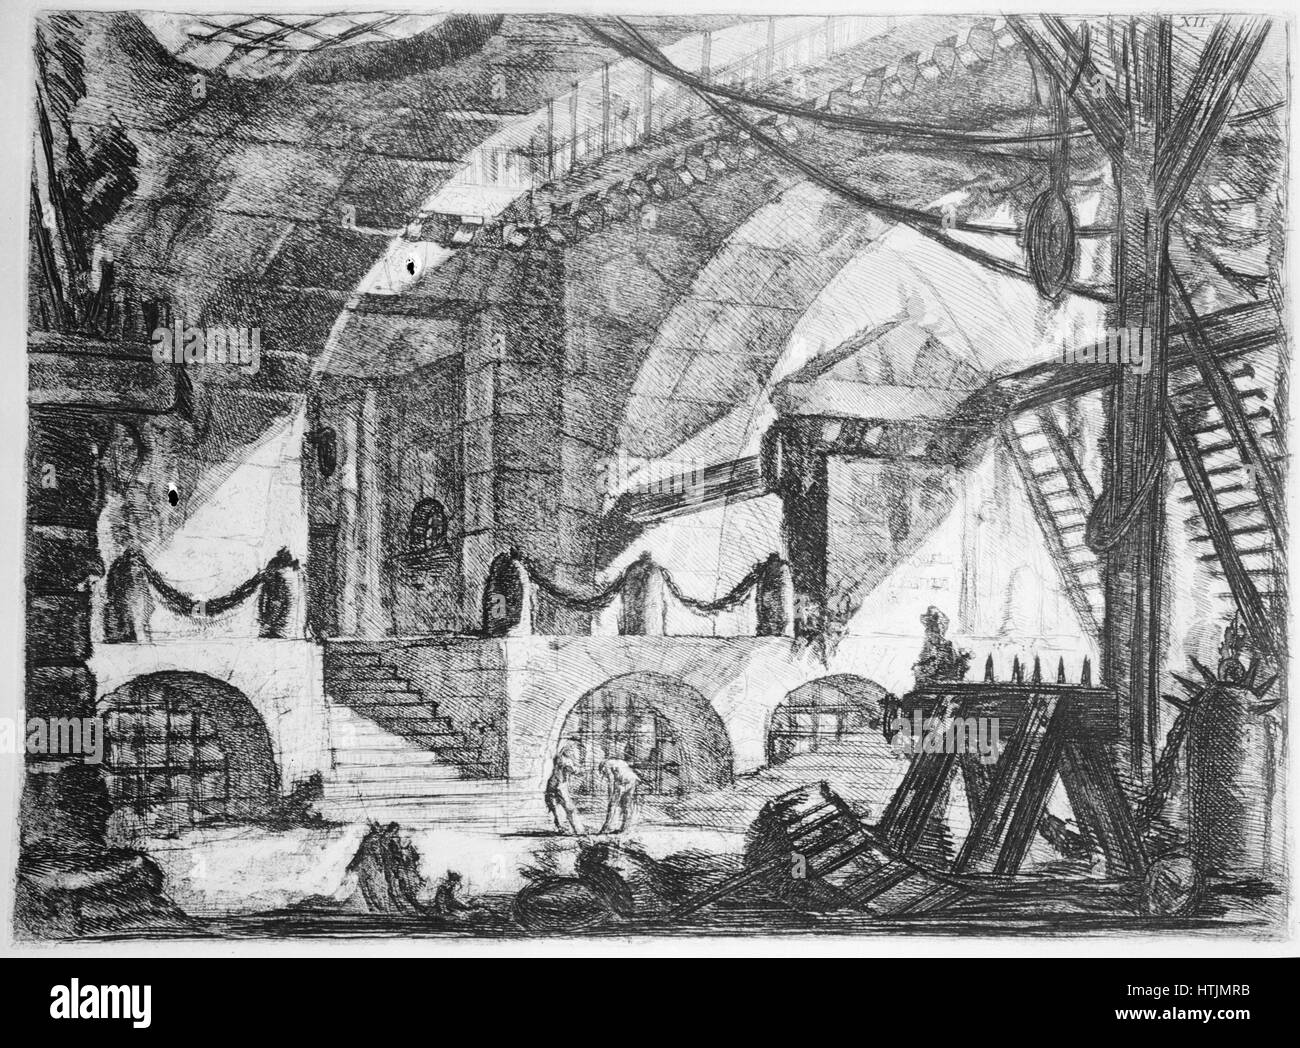 The Imaginary Prisons (Carceri d'invenzione), second version of the series of engravings by Giovanni Battista Piranesi, published in 1761. Plate XII: The Sawhorse Private collection Stock Photo